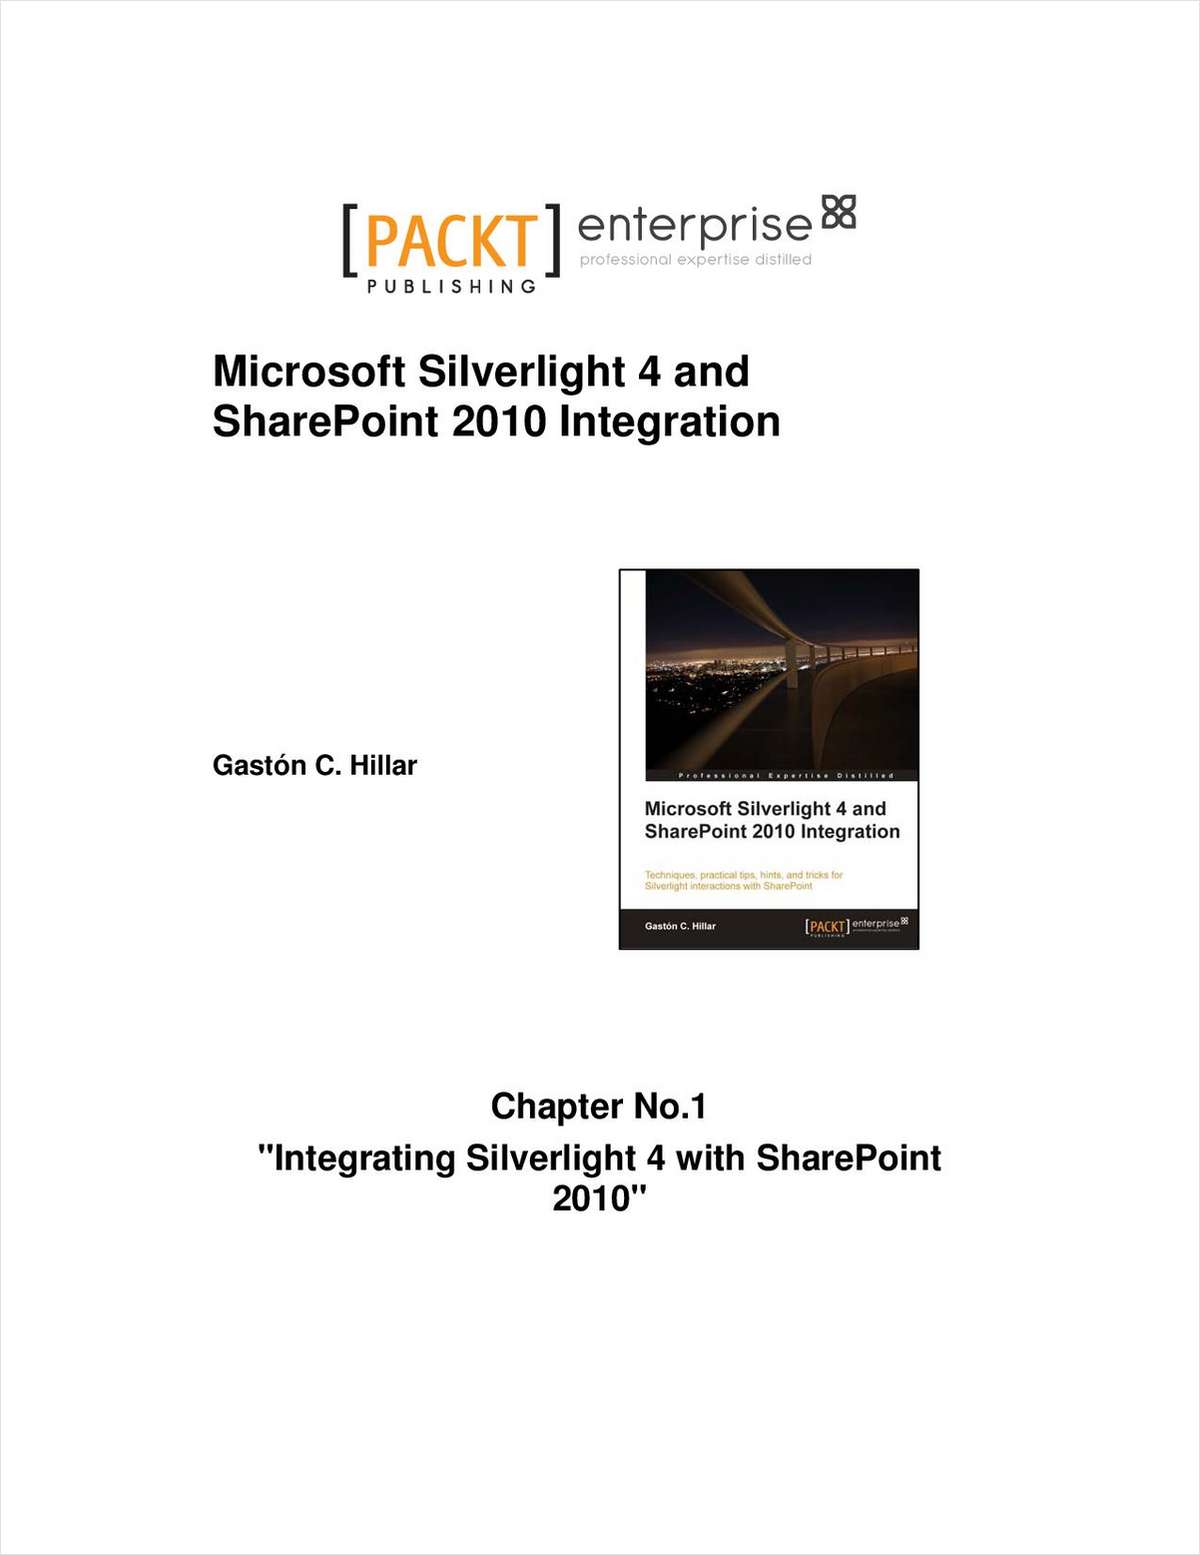 Integrating Silverlight 4 with SharePoint 2010 -- Free 42 Page Sample Chapter